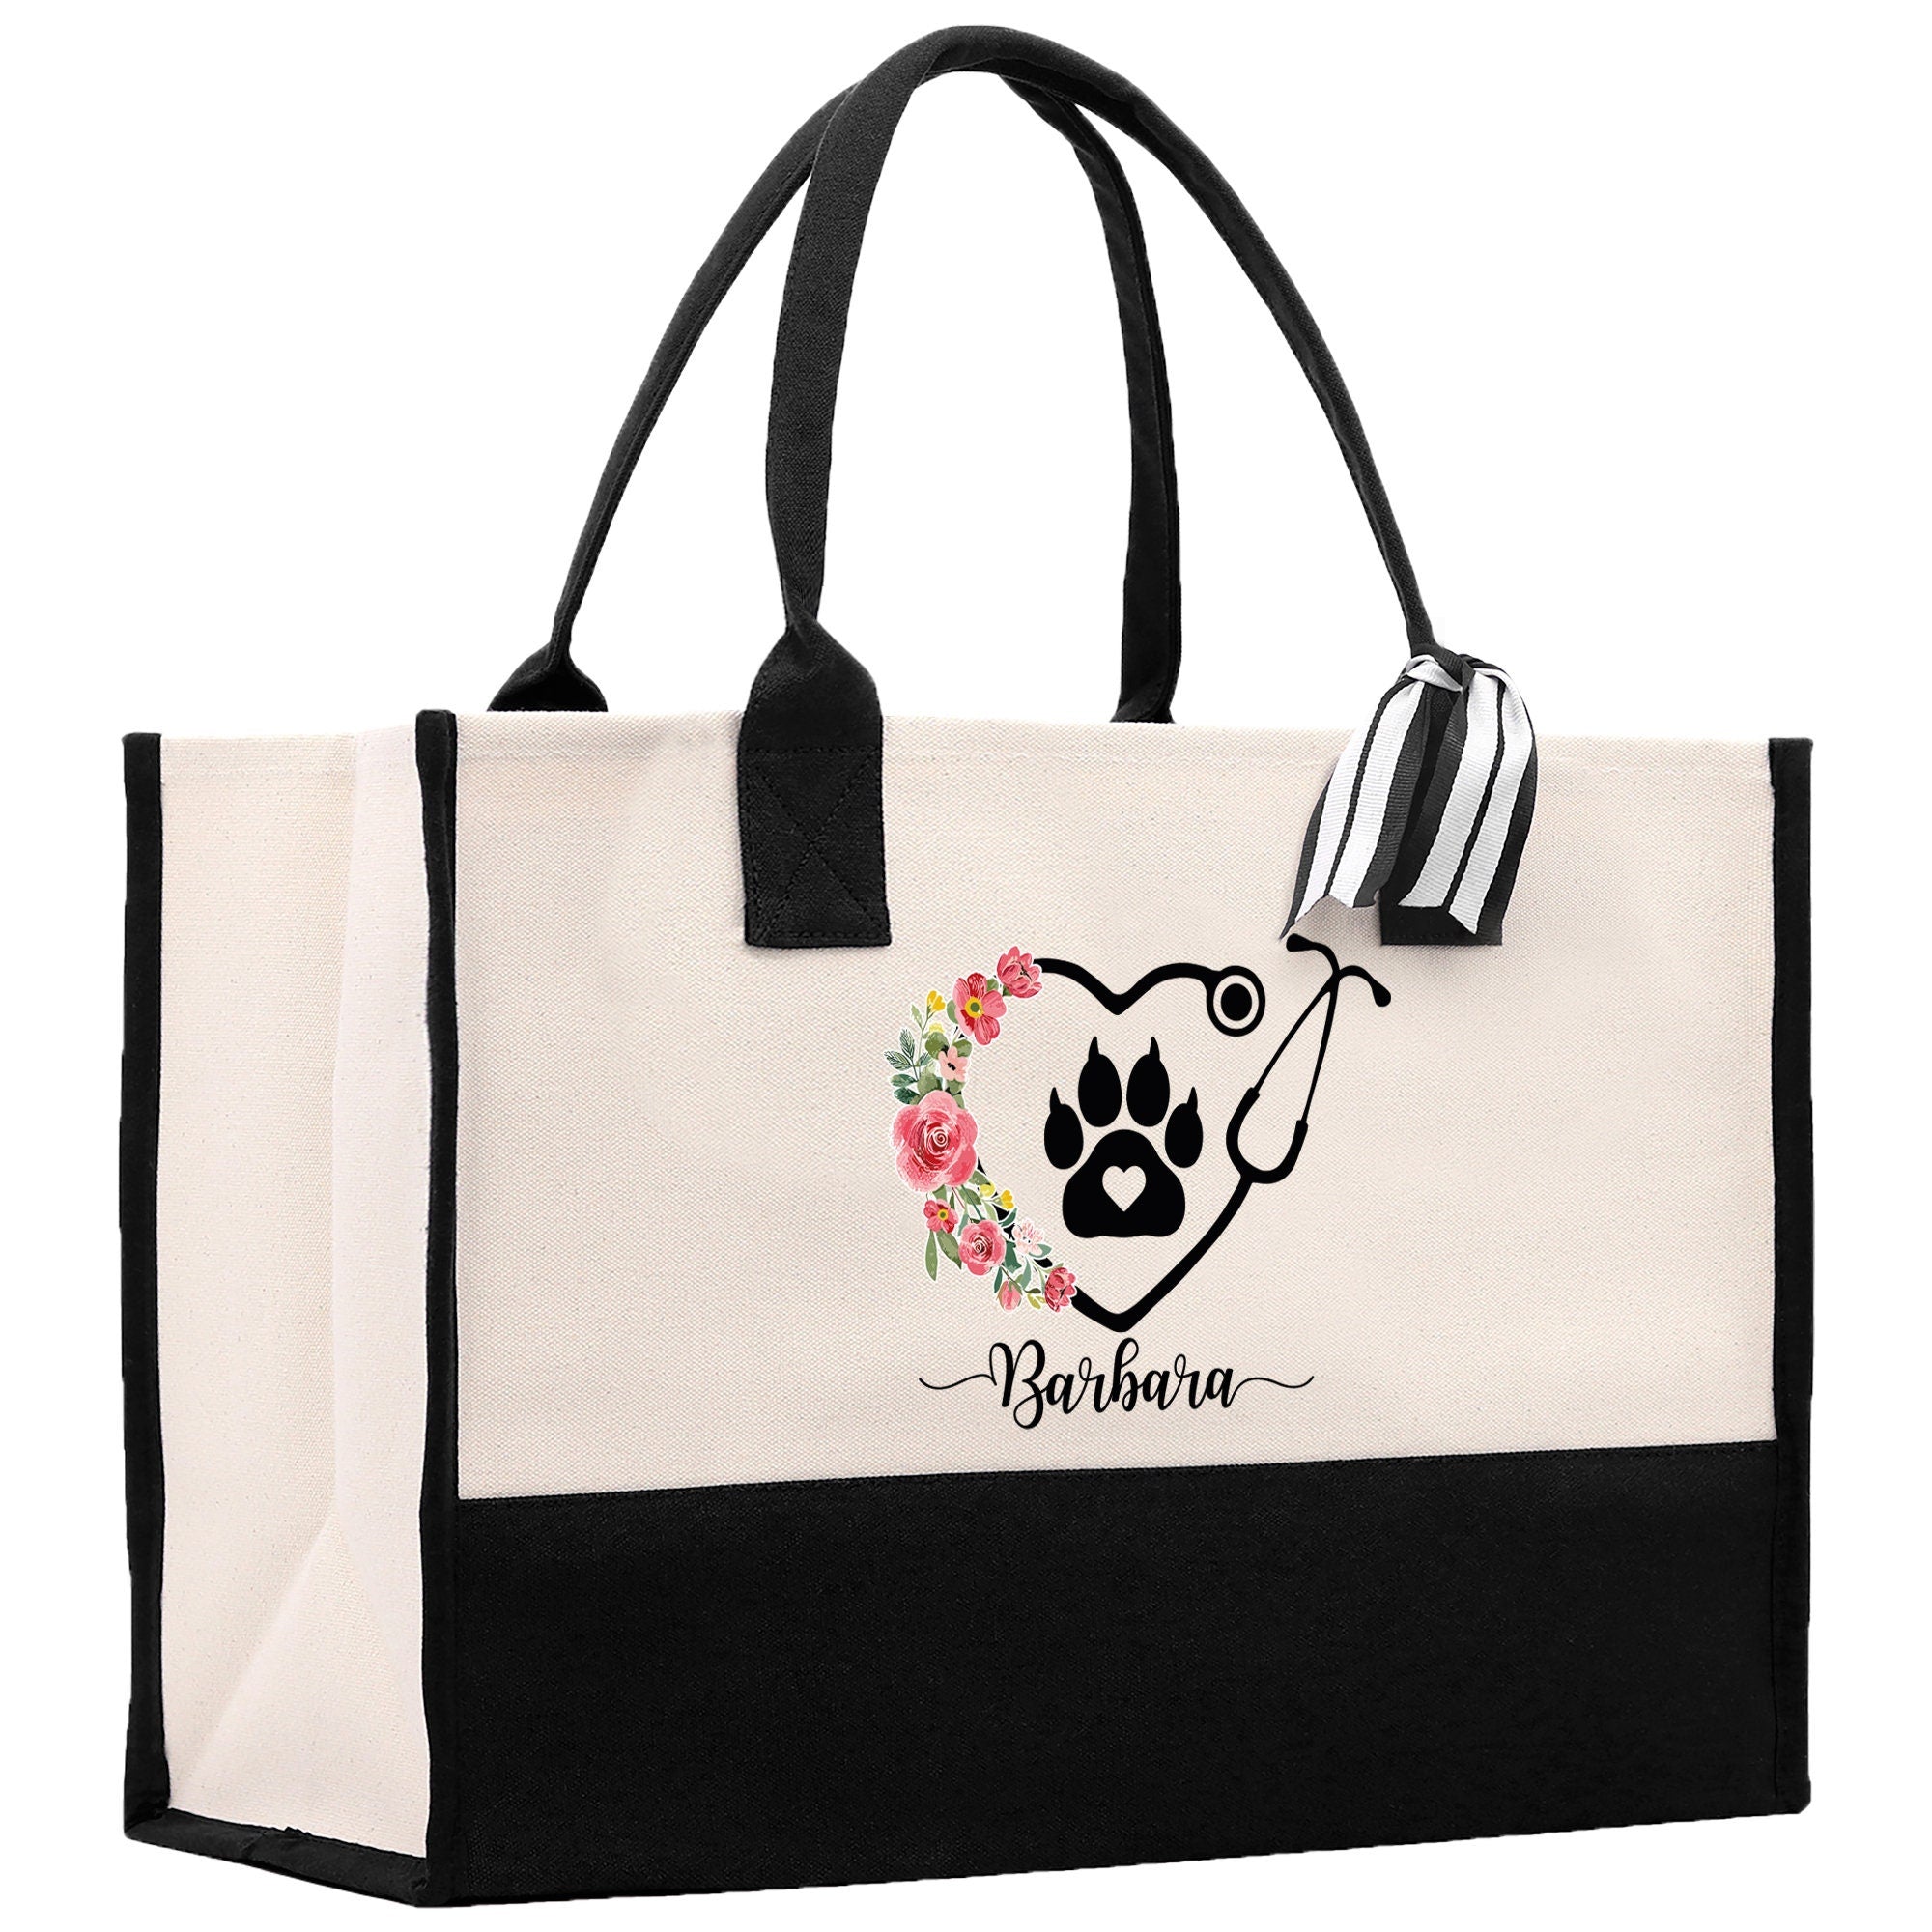 a black and white bag with a dog paw on it